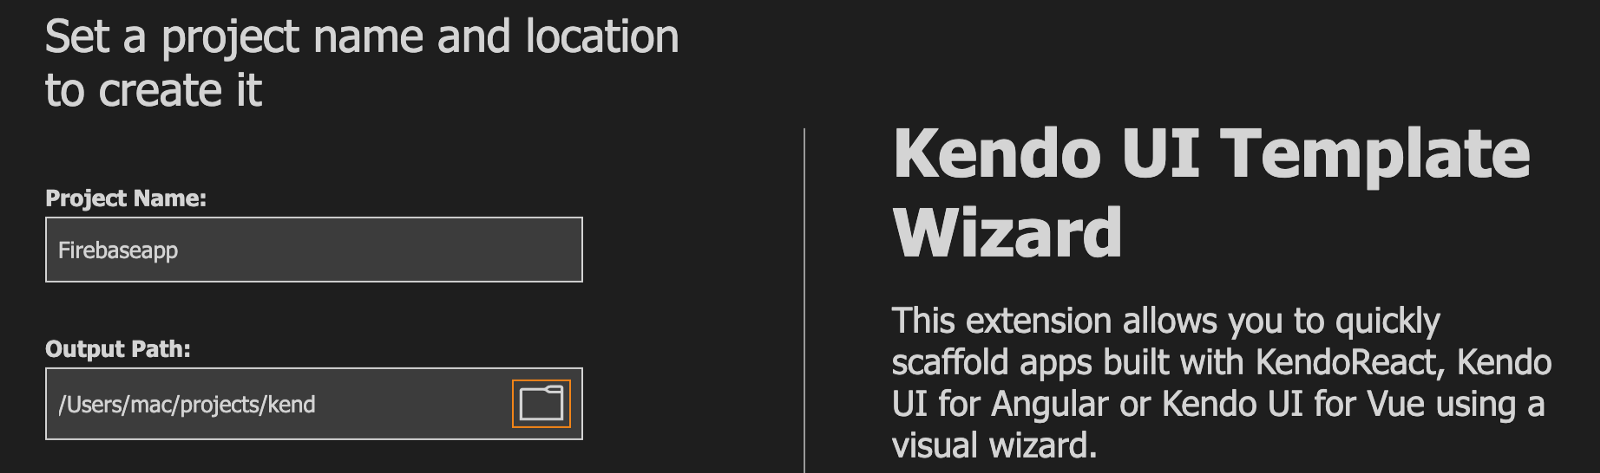 Set a project name and location to create it. There are fields for Project name (ours is Firebaseapp) and Output Path. The Kendo UI Template Wizard says, ‘This extension allows you to quickly scaffloed apps built with KendoReact, Kendo UI for Angular or Kendo UI for Vue using a visual wizard.